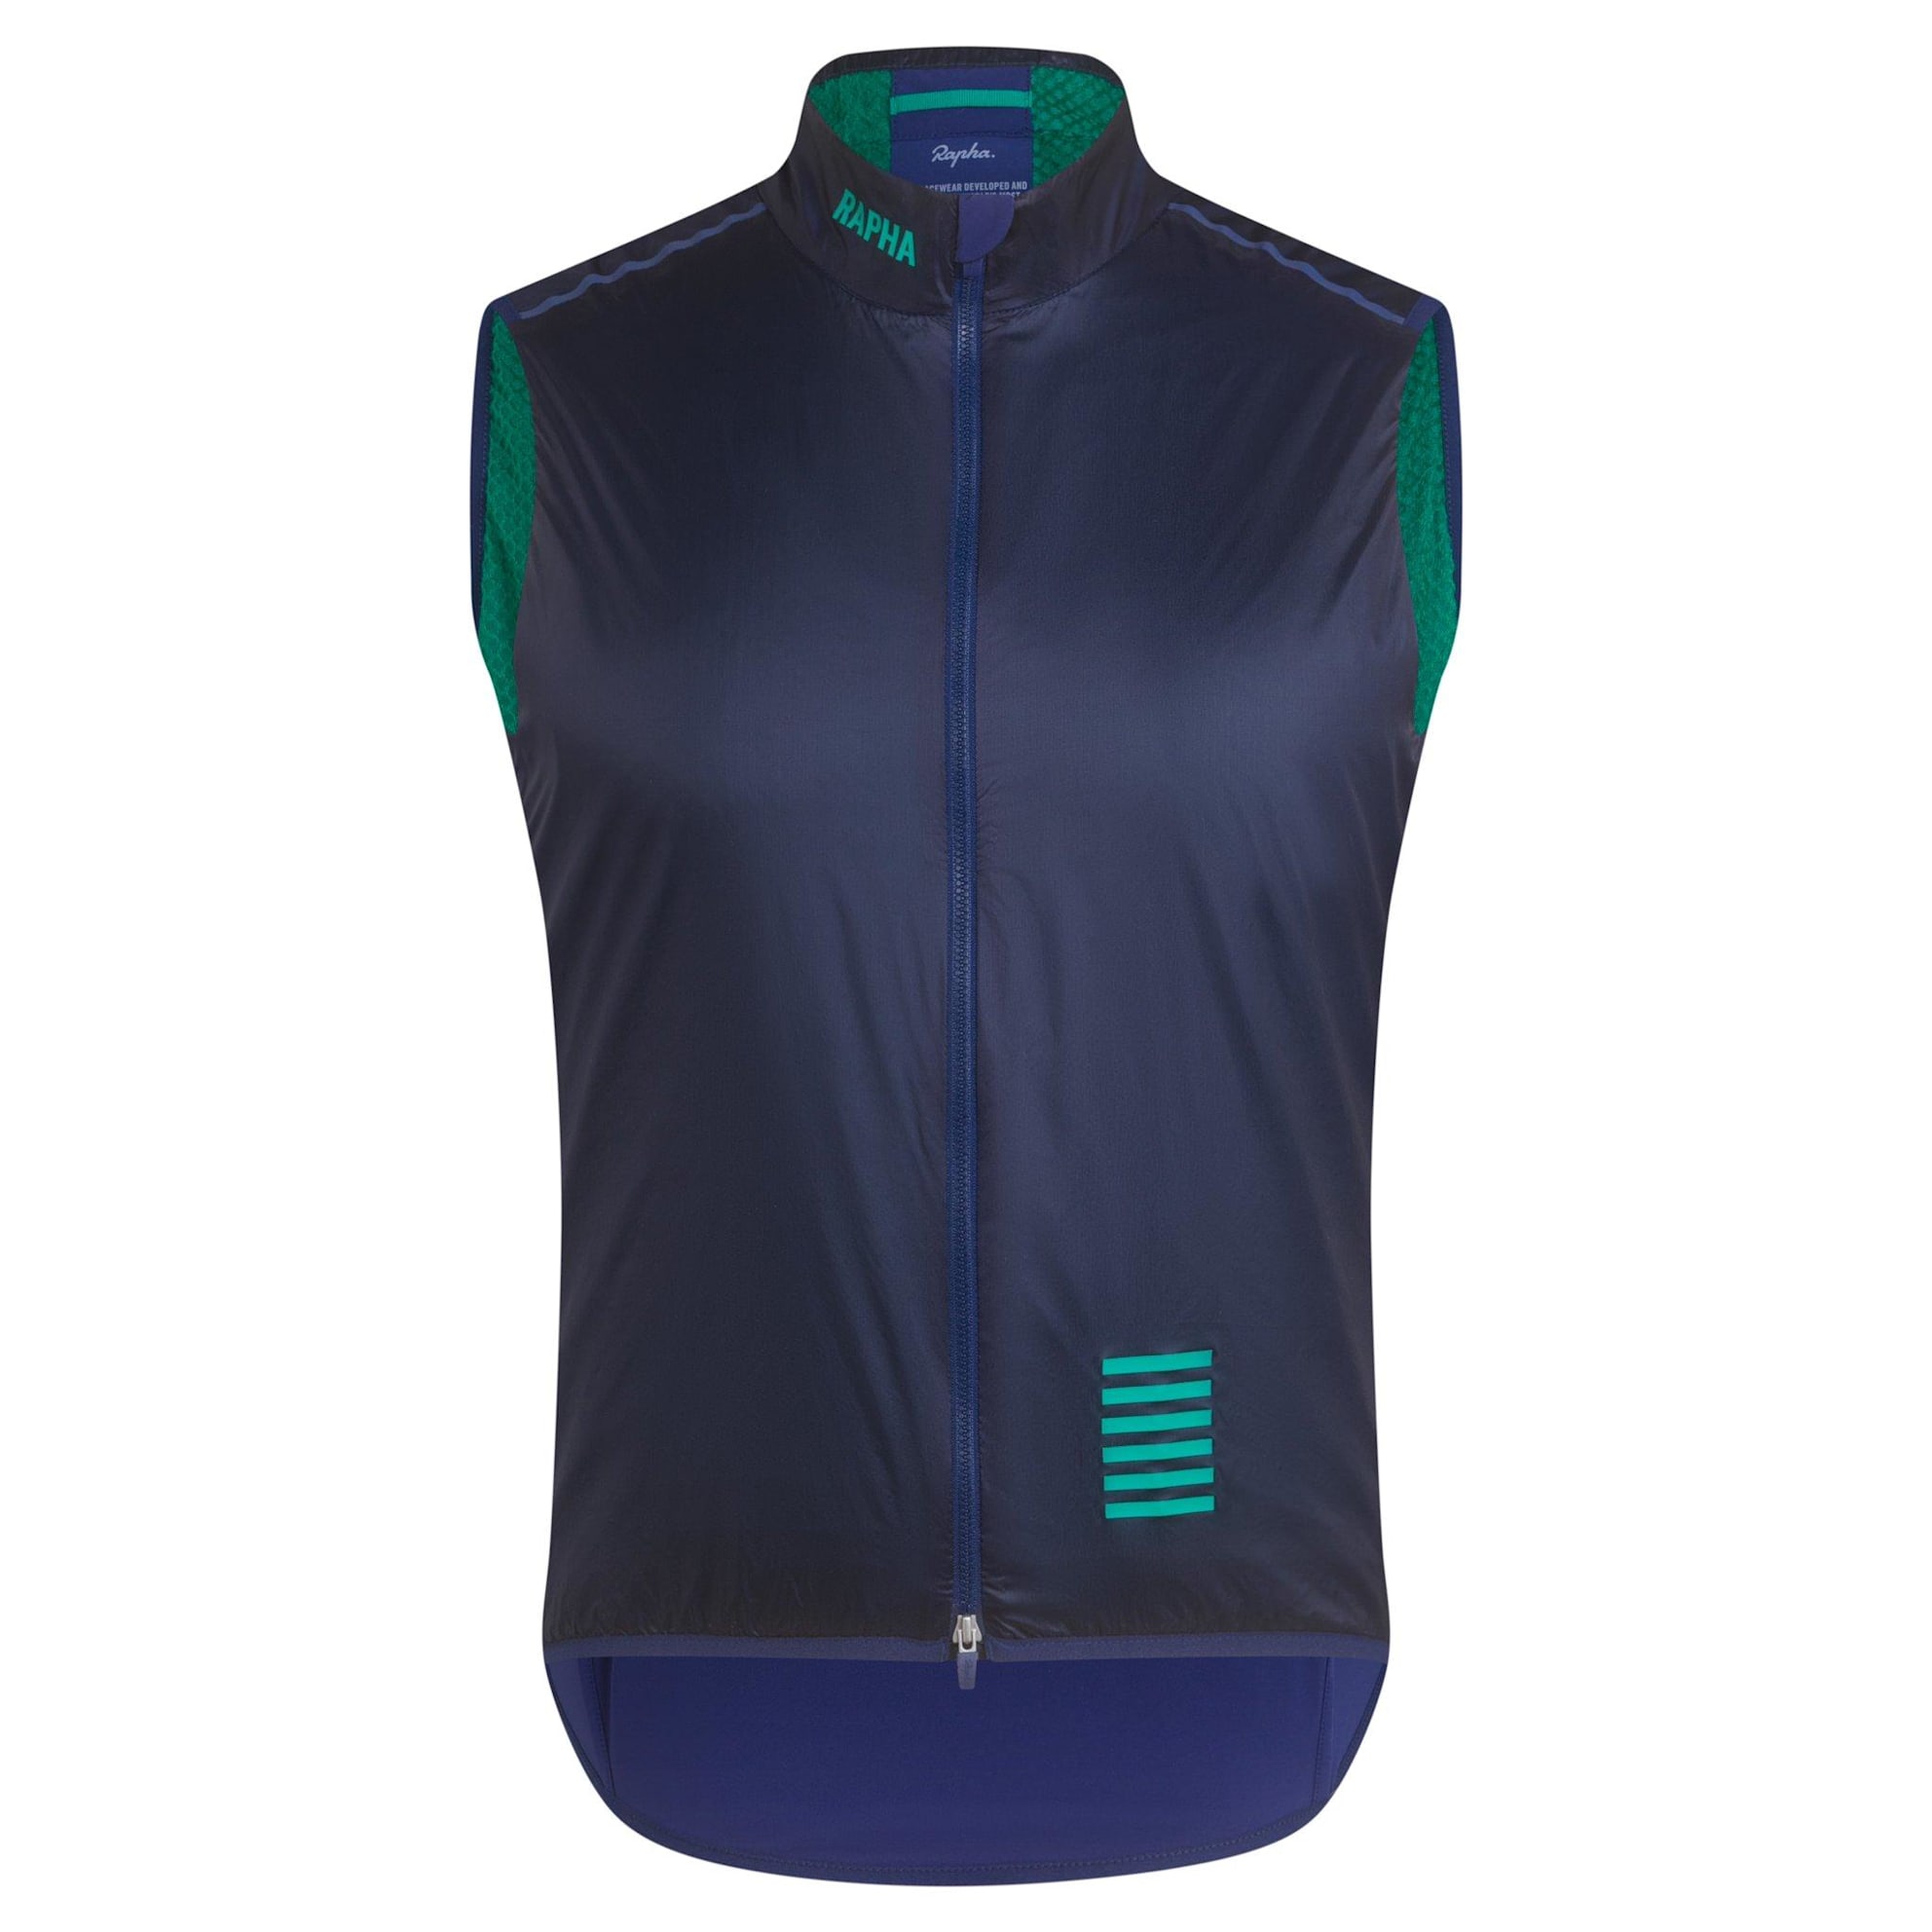 Men's Cycling Jerseys, Clothing & Accessories | Rapha Site